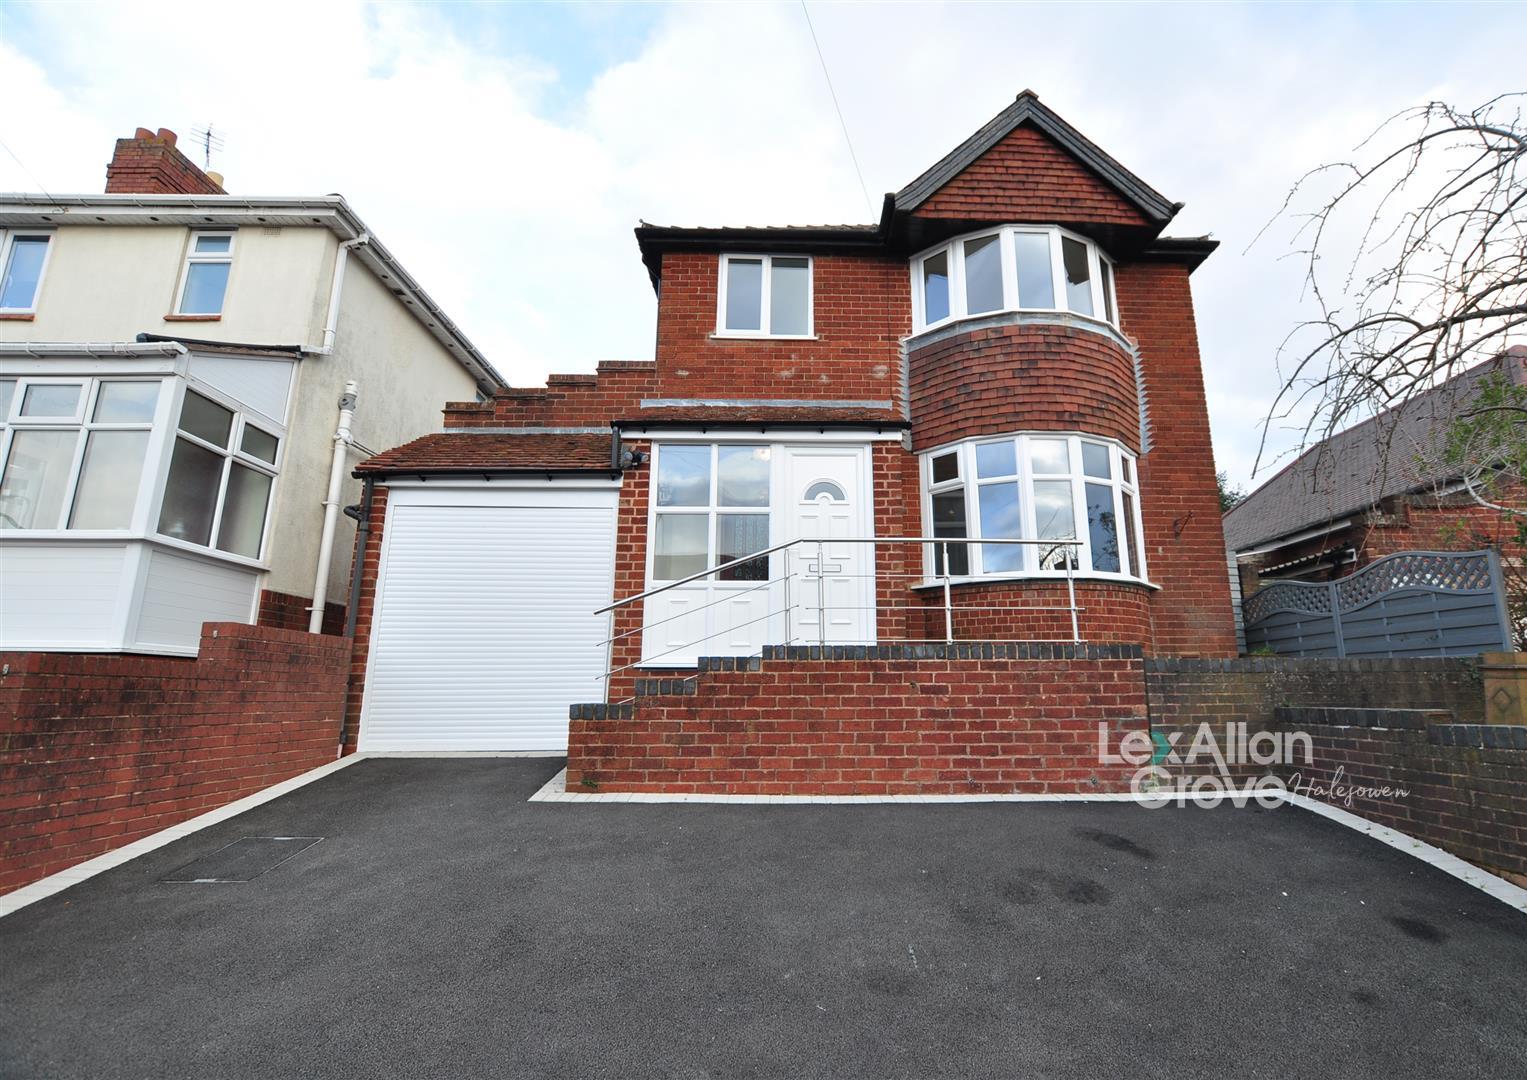 3 bed  for sale in Highfield Crescent, Rowley Regis, B65 